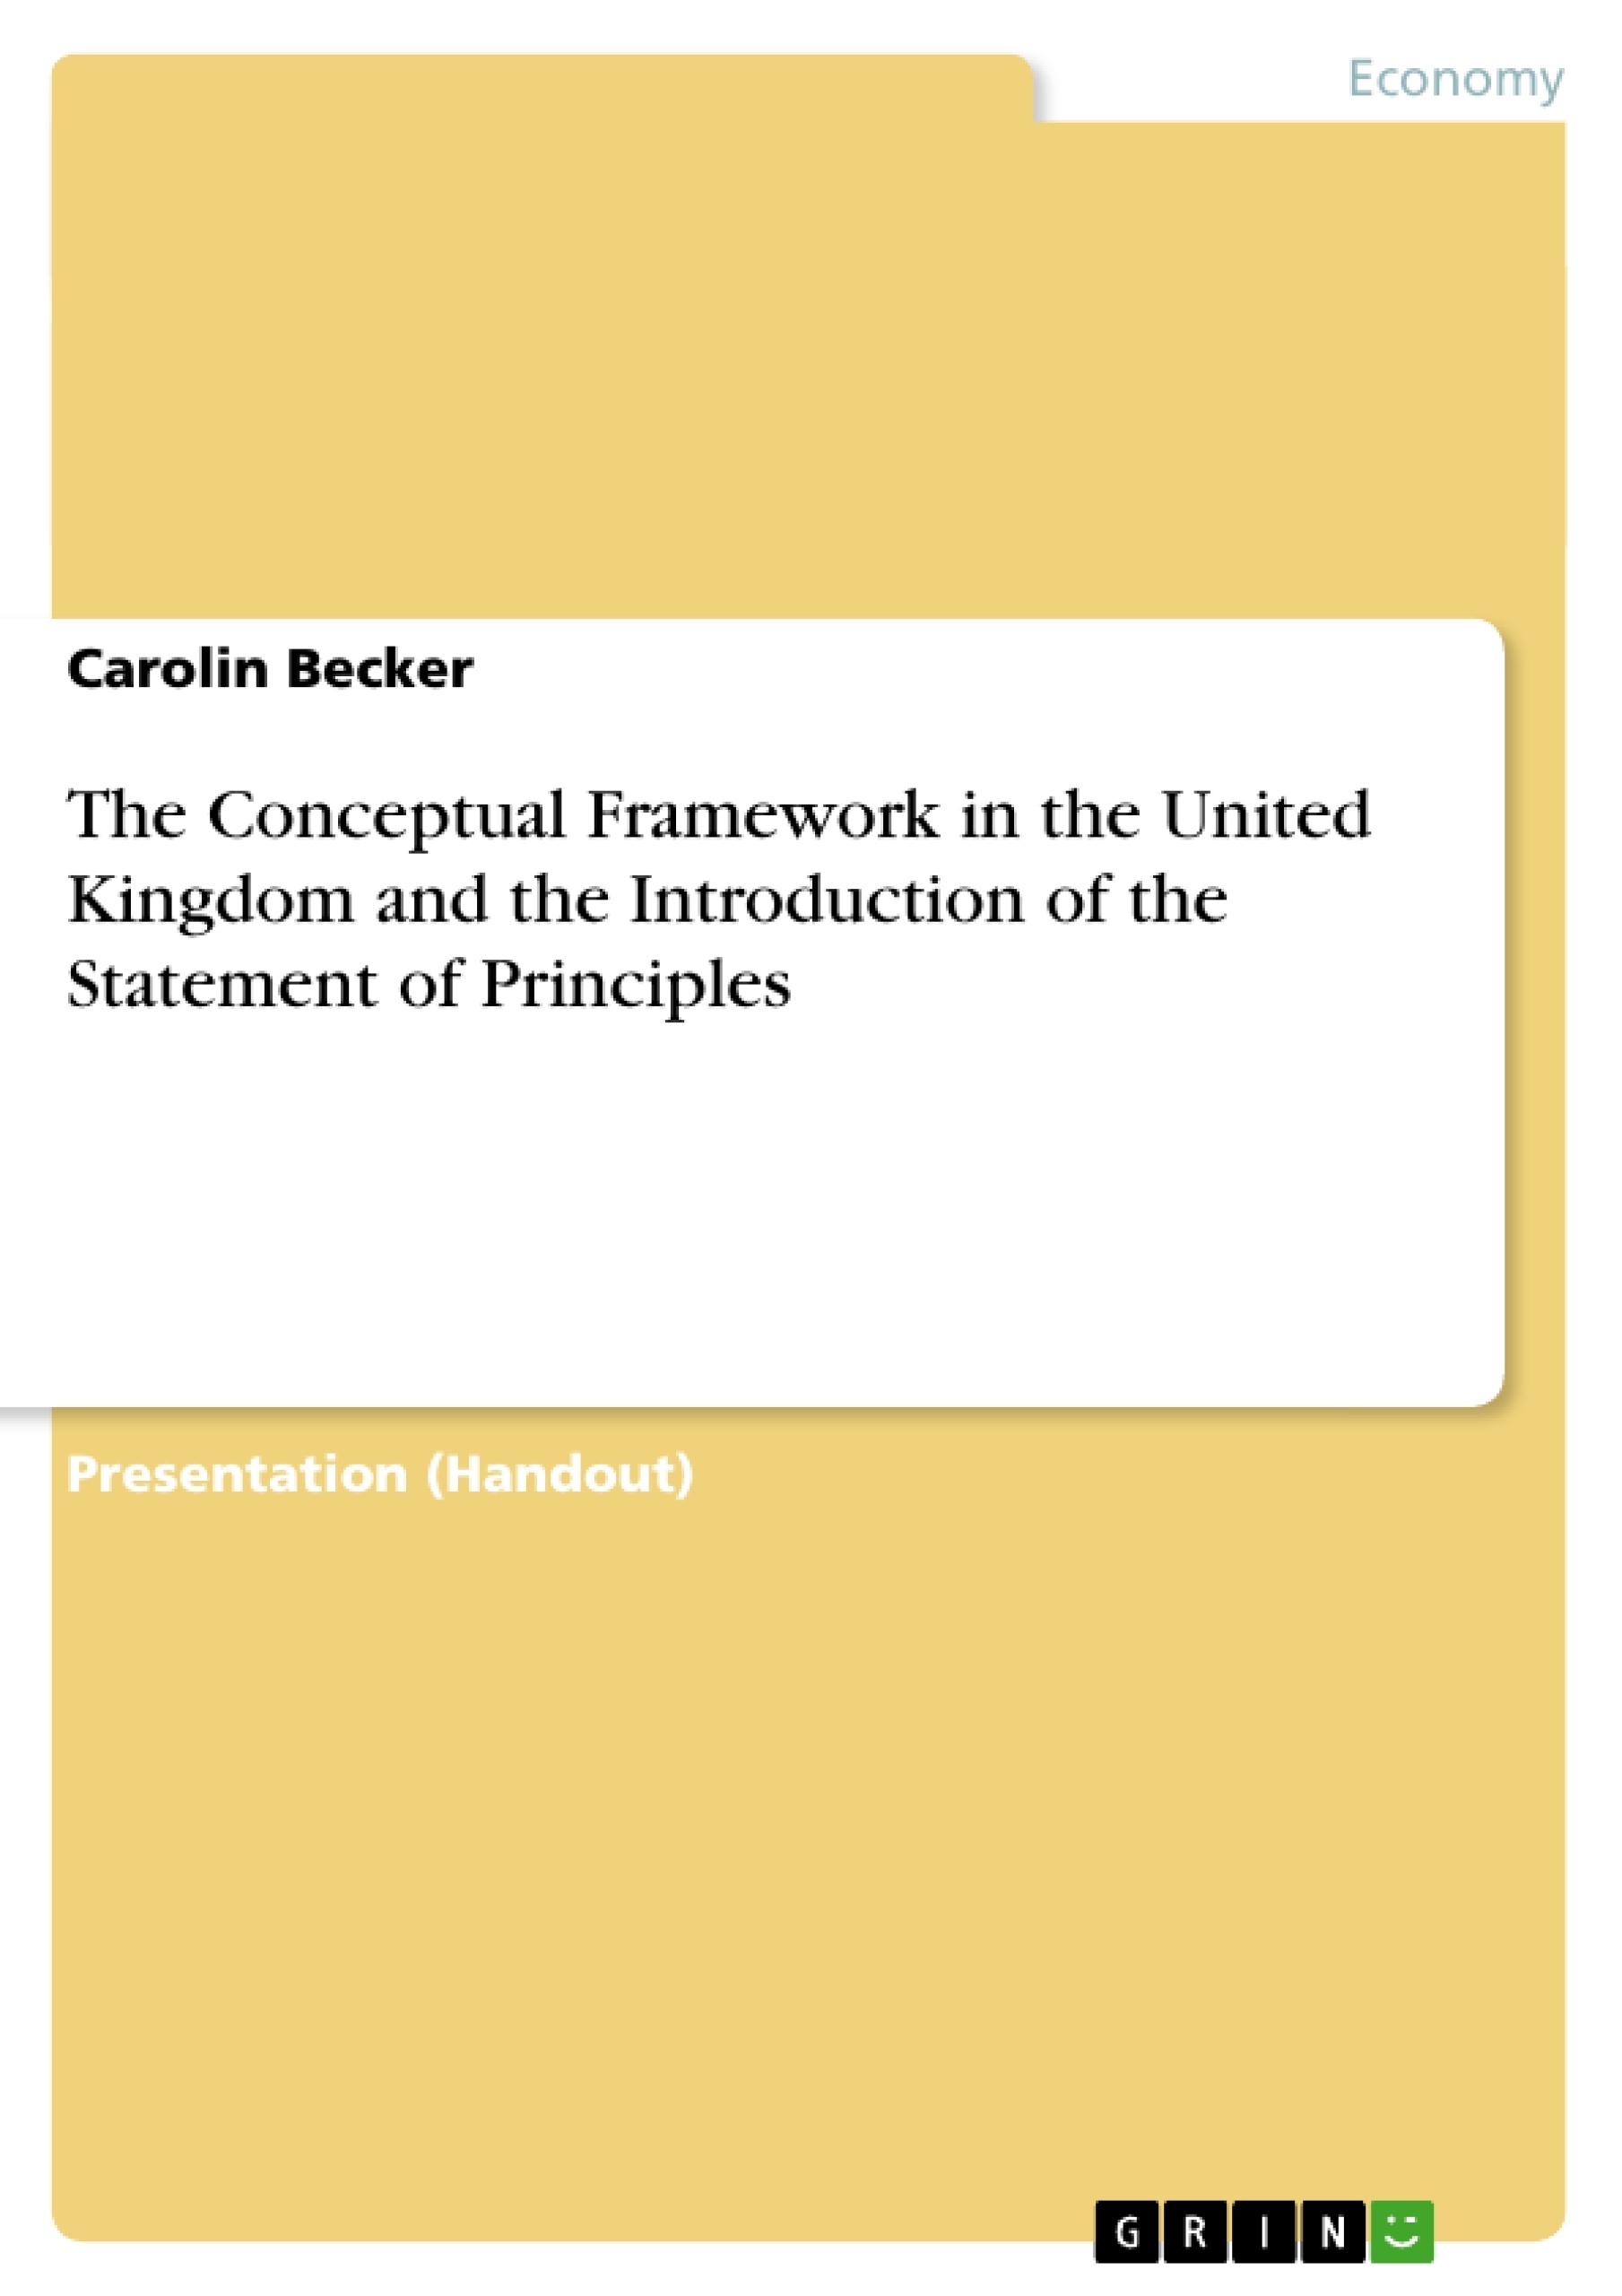 Titre: The Conceptual Framework in the United Kingdom and the Introduction of the Statement of Principles